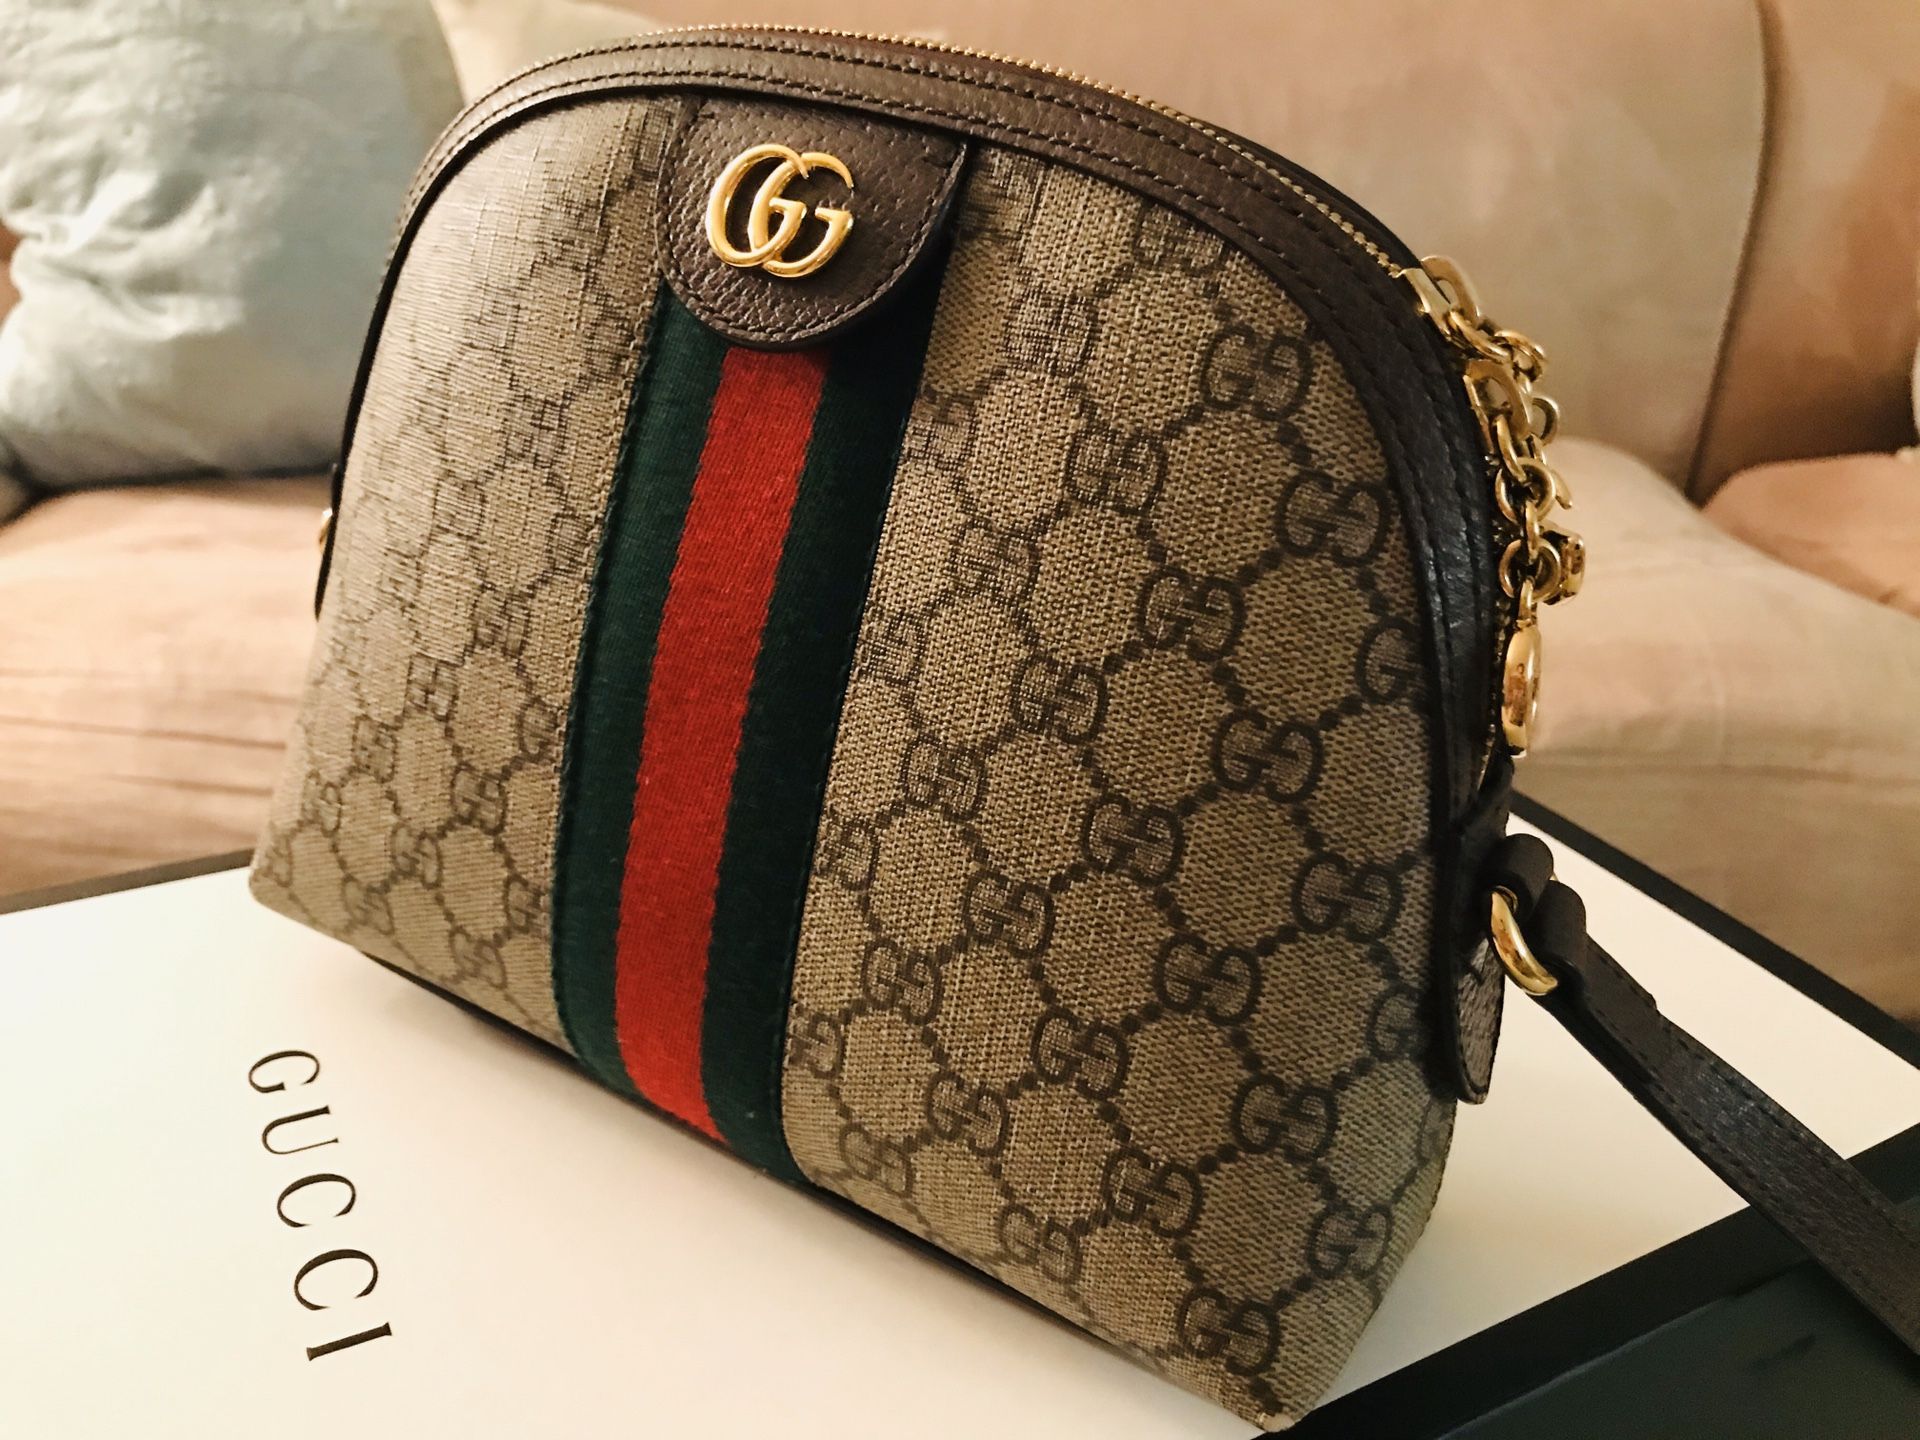 Authentic Gucci Ophidia crossbody bag in like new condition